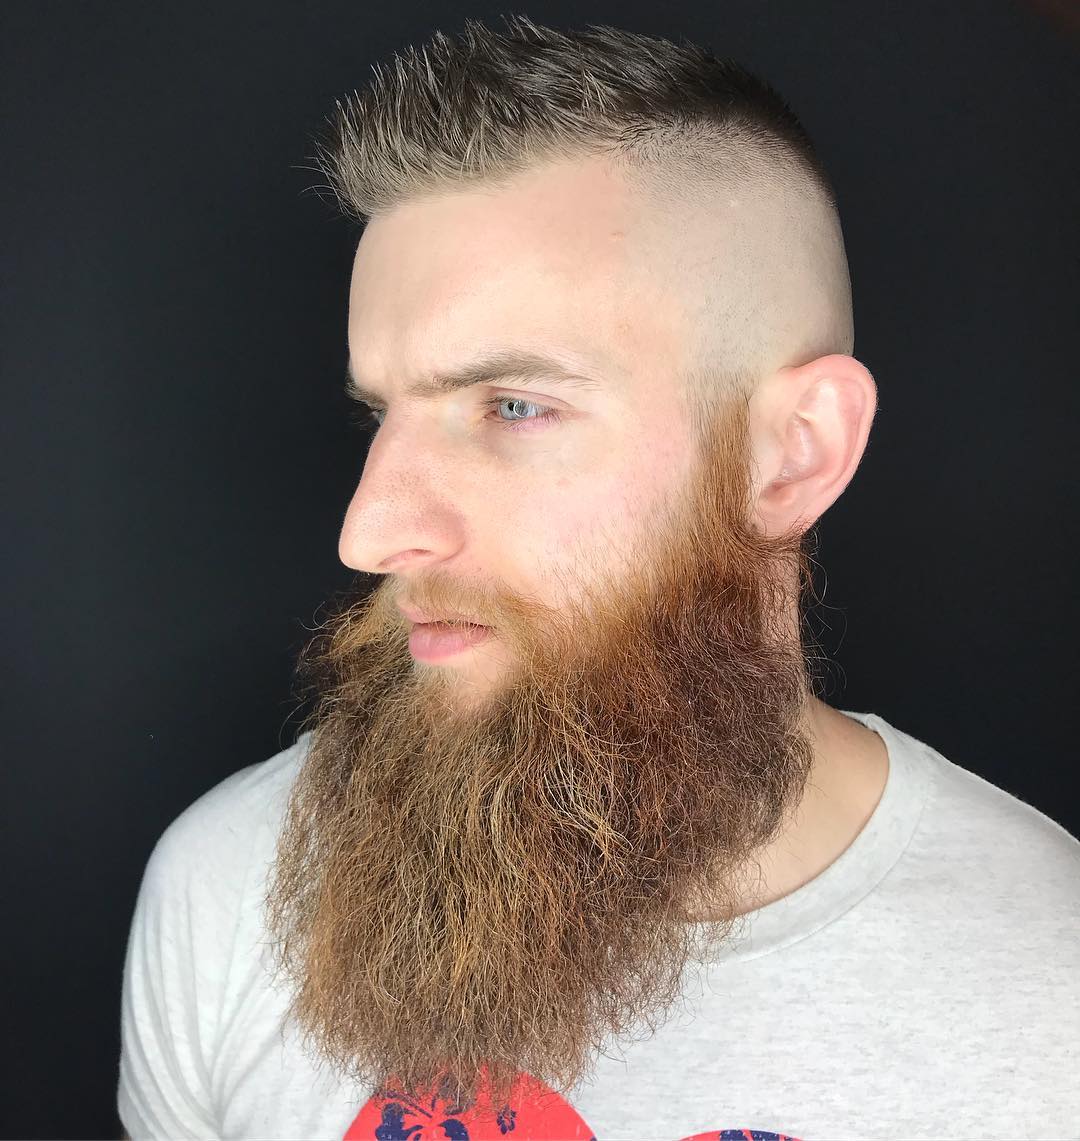 10 styles of beard that are currently the most popular